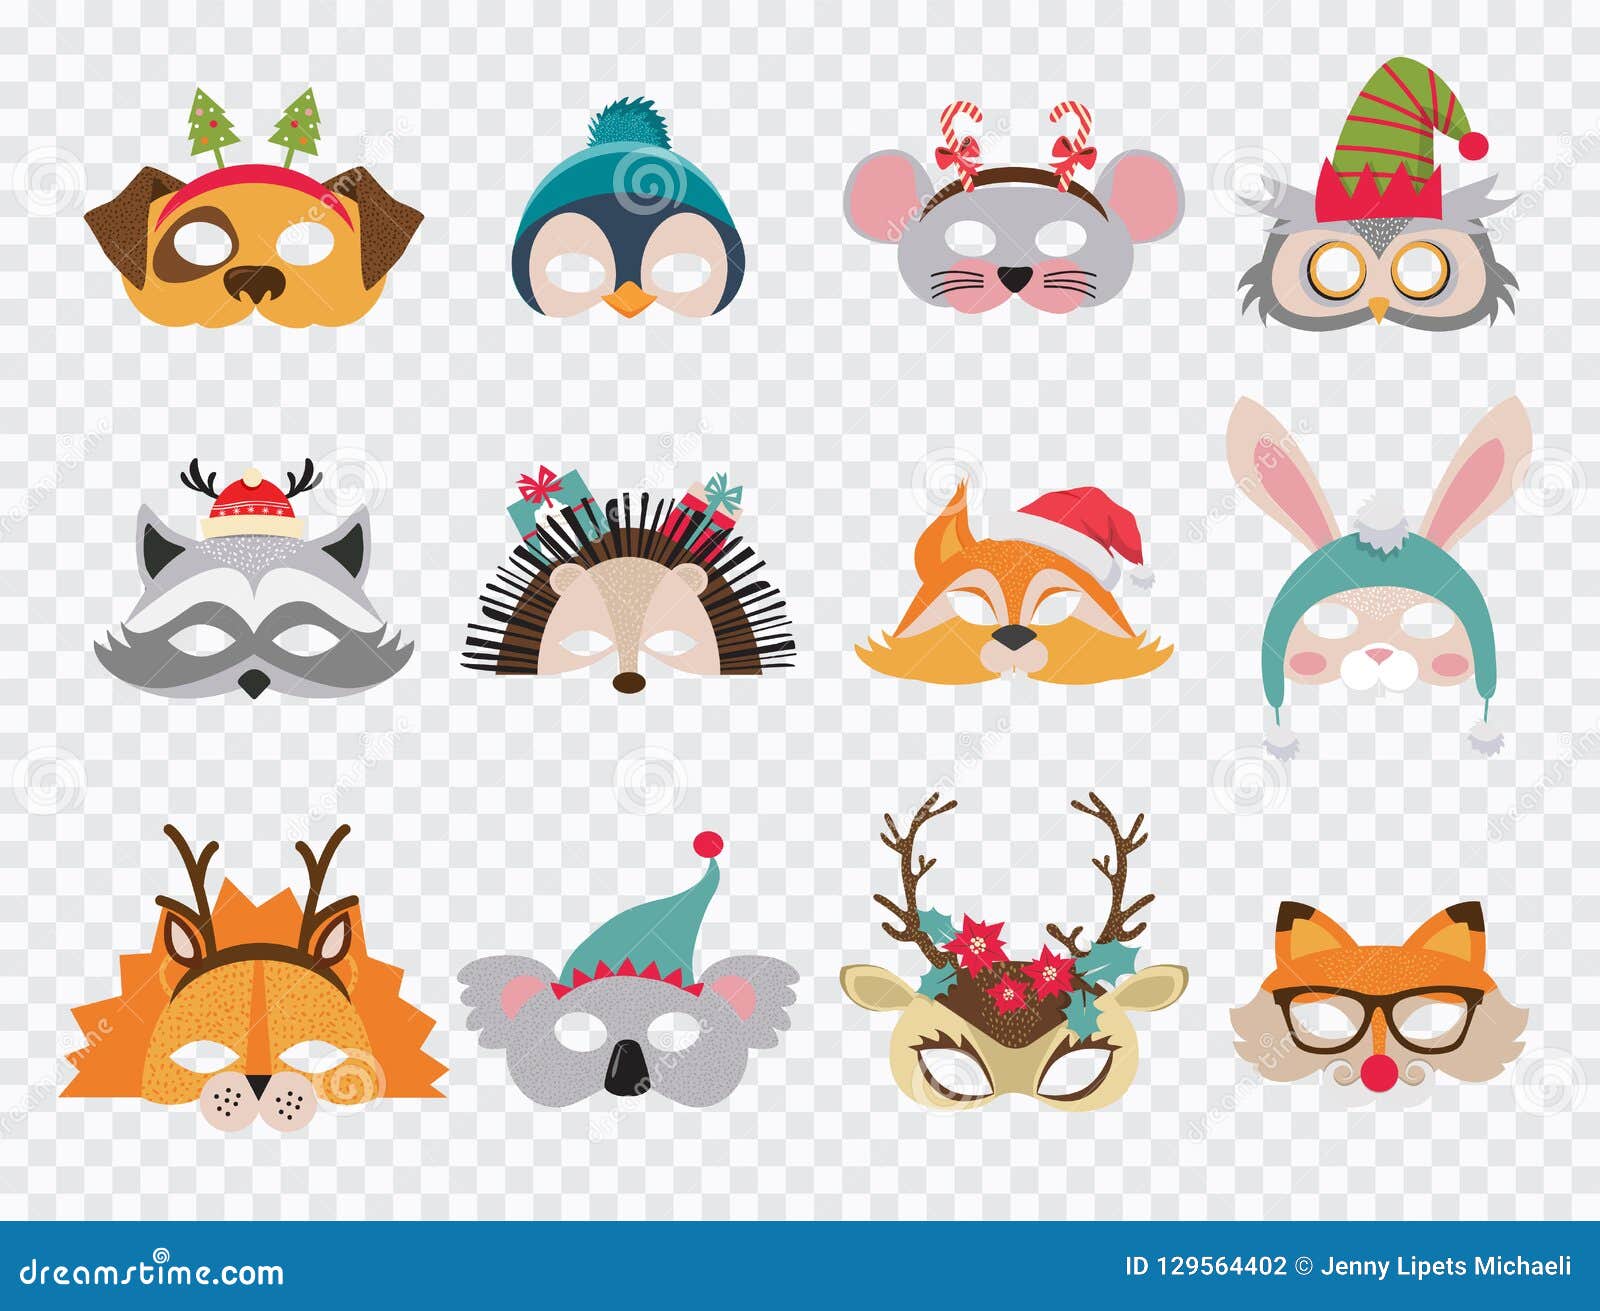 Collection of Winter Animal Masks and Christmas Photo Booth Props for Kids.  Cute Cartoon Masks and Elements for a Party Stock Vector - Illustration of  design, nose: 129564402